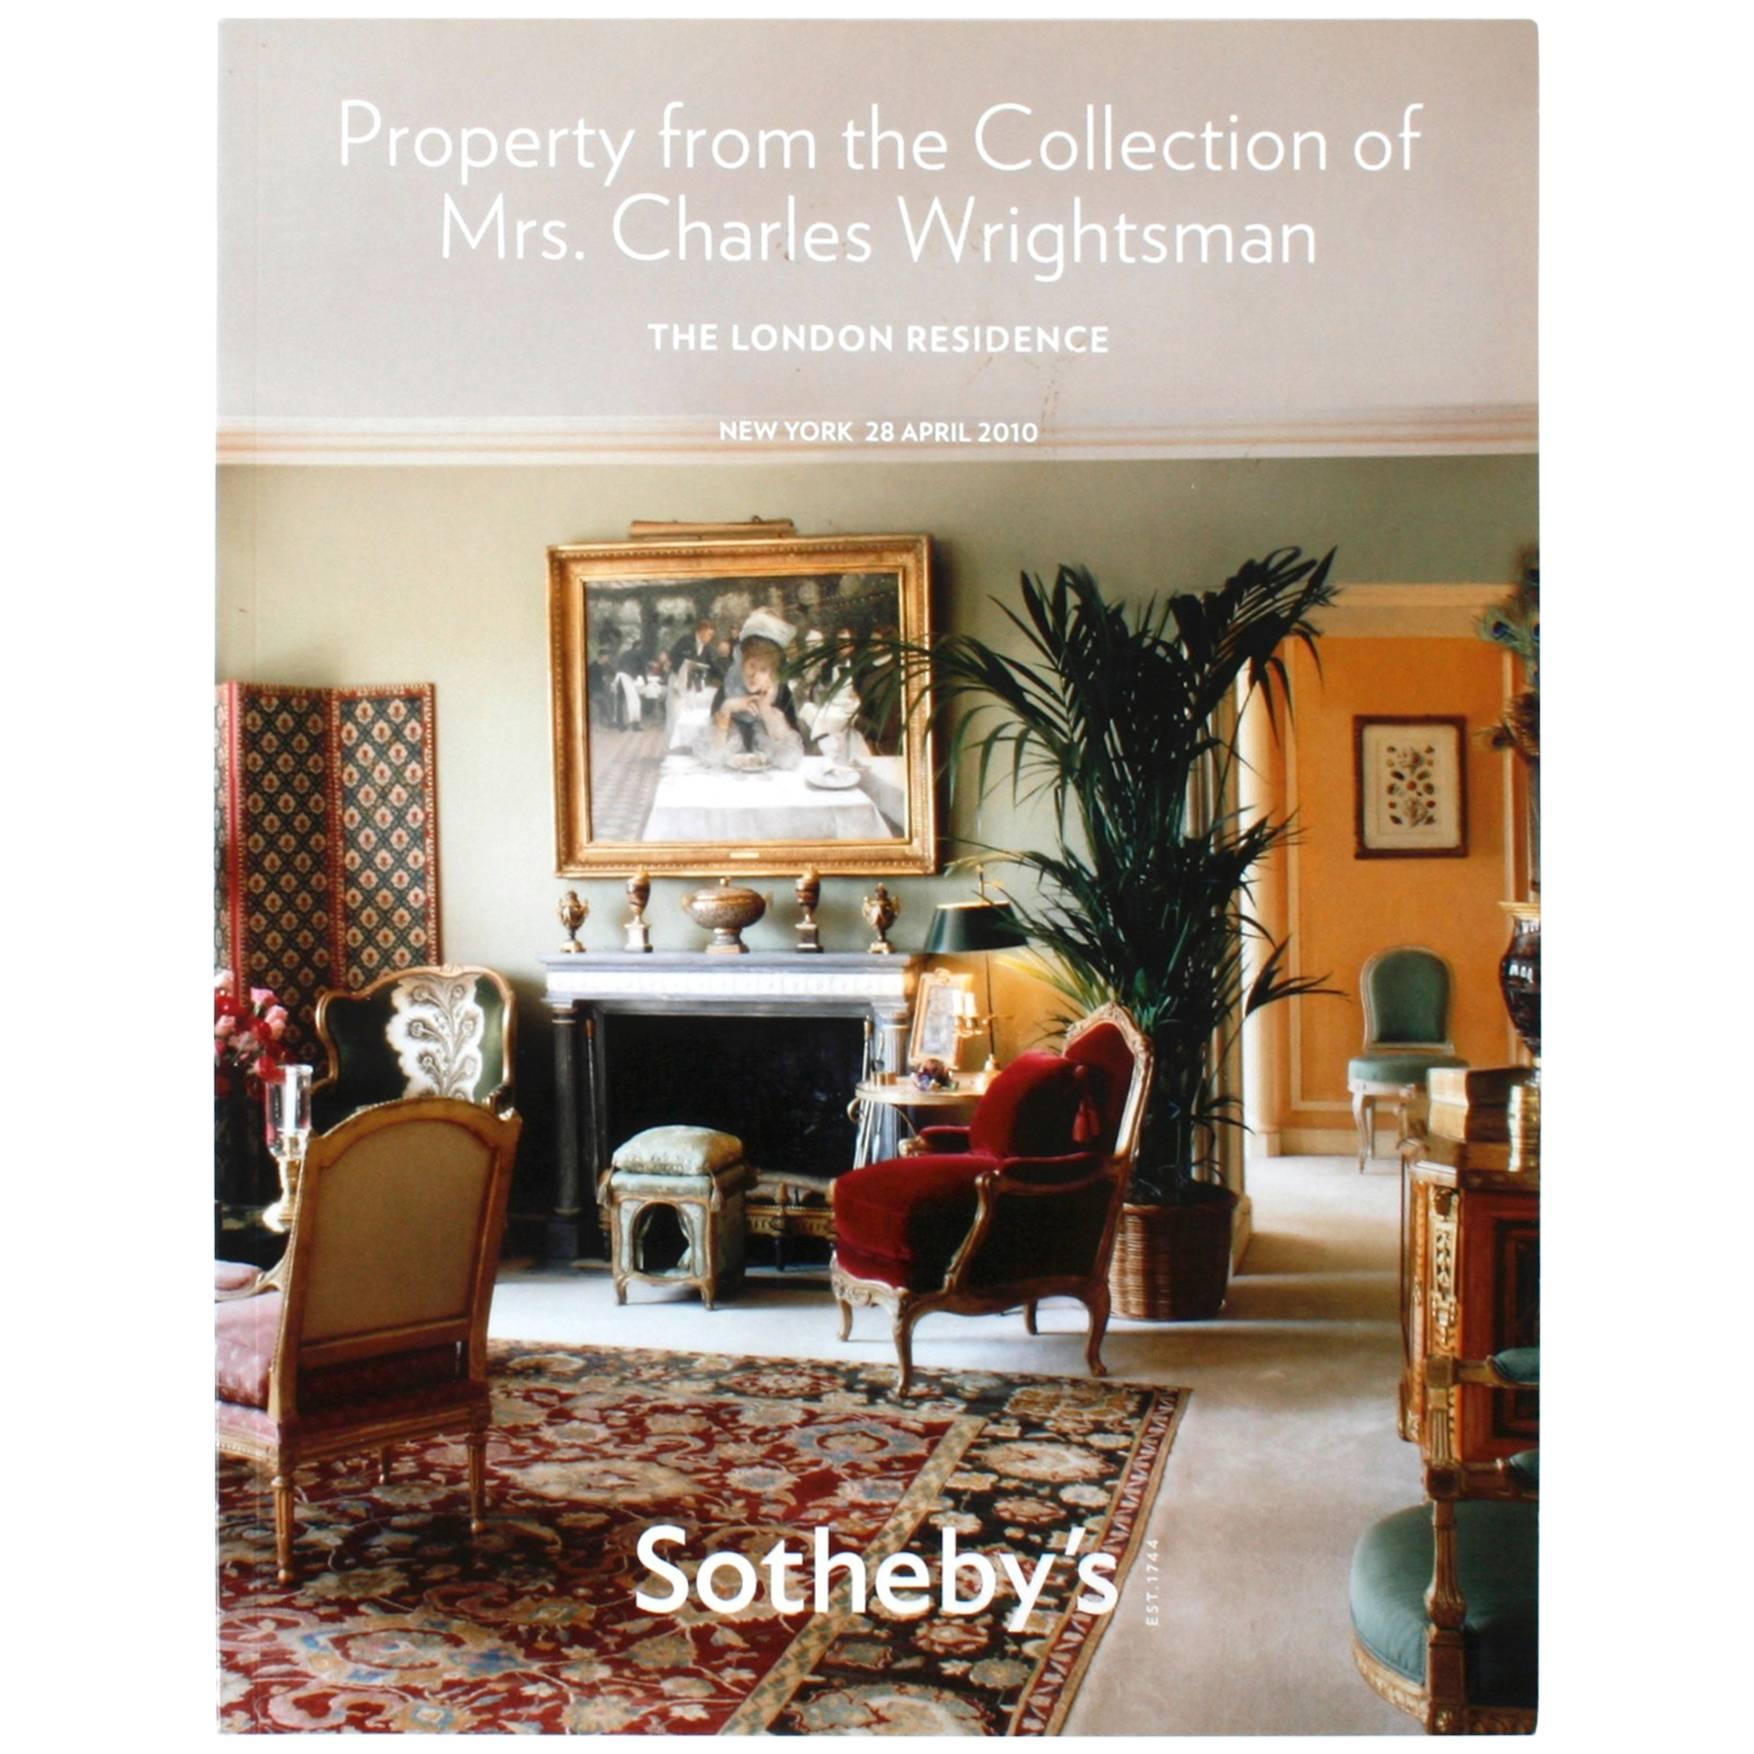 Sotheby's Property from Collection of Mrs. Charles Wrightsman, London Residence